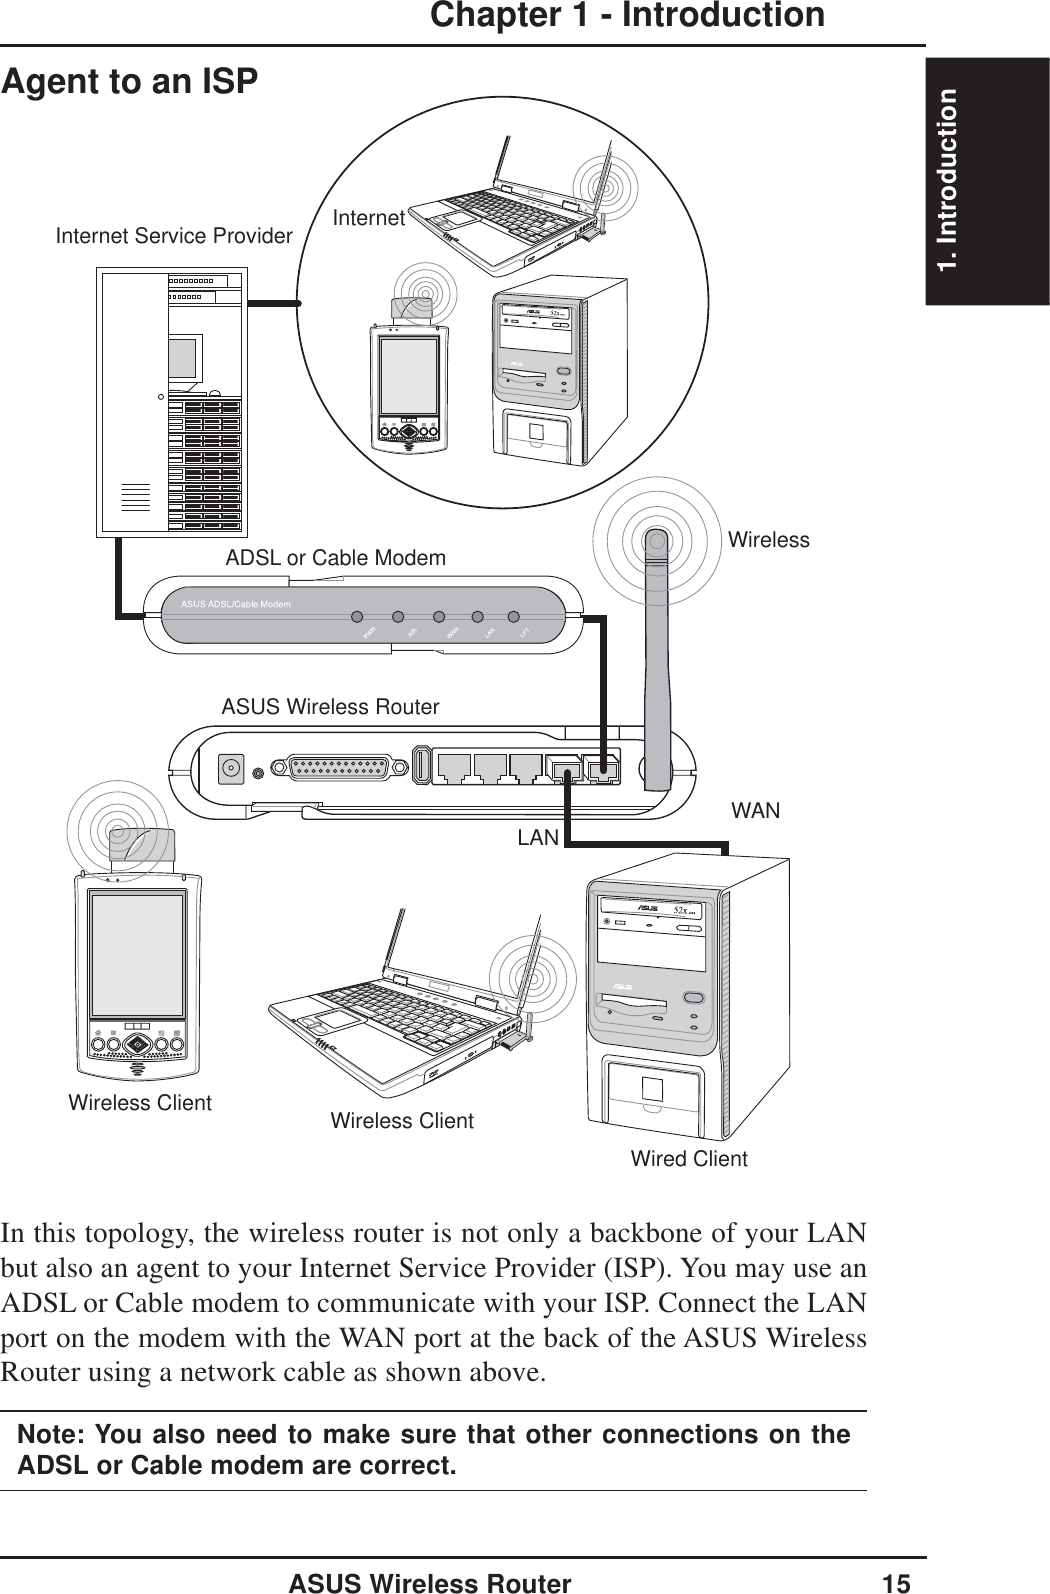 1. IntroductionASUS Wireless Router 15Chapter 1 - IntroductionASUS Wireless RouterWirelessInternet Service ProviderWired ClientWireless ClientWireless ClientWANLANADSL or Cable ModemInternetAgent to an ISPIn this topology, the wireless router is not only a backbone of your LANbut also an agent to your Internet Service Provider (ISP). You may use anADSL or Cable modem to communicate with your ISP. Connect the LANport on the modem with the WAN port at the back of the ASUS WirelessRouter using a network cable as shown above.Note: You also need to make sure that other connections on theADSL or Cable modem are correct.